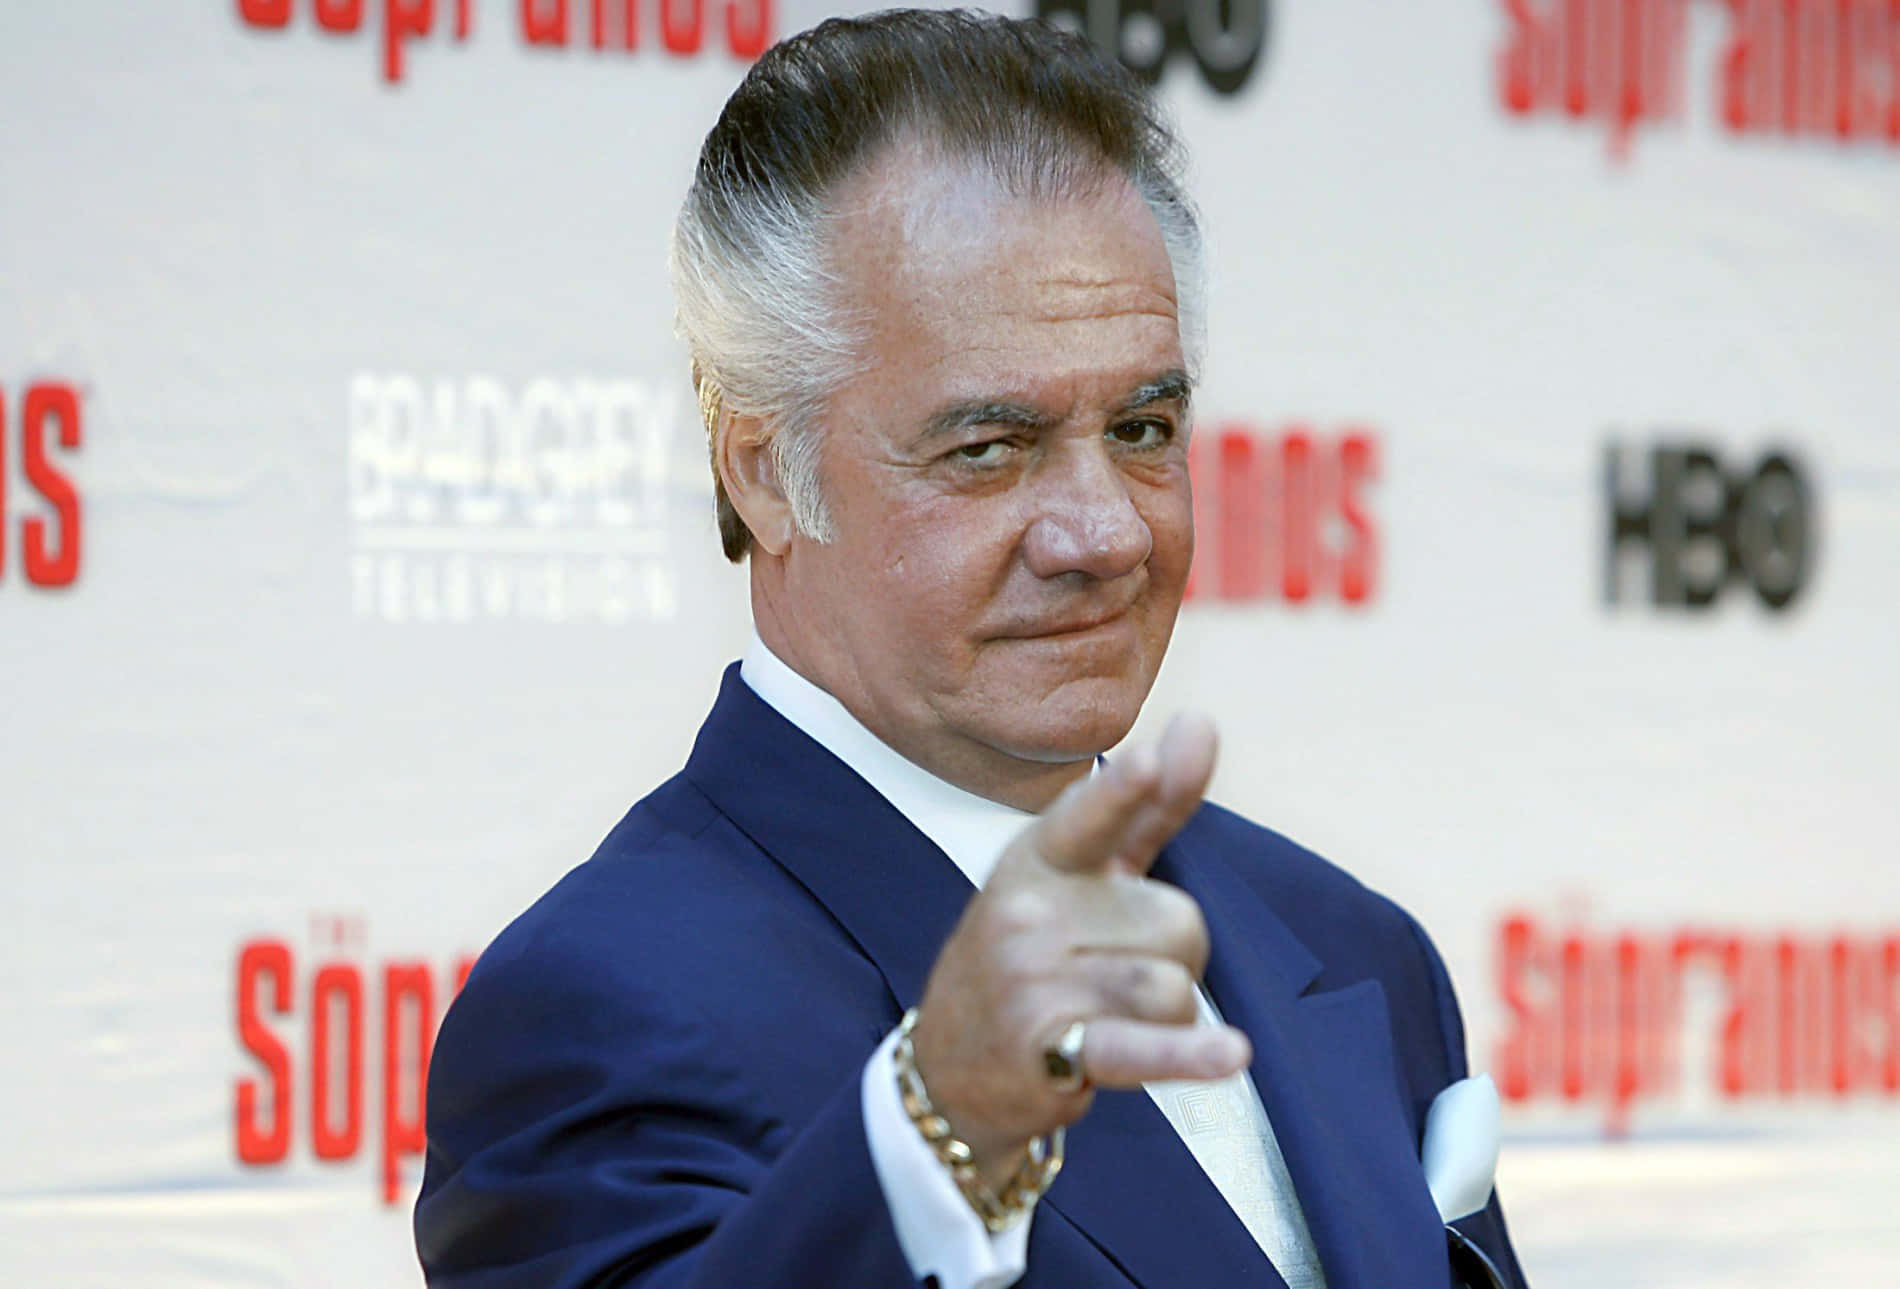 Tony Sirico striking a pose in a suit Wallpaper